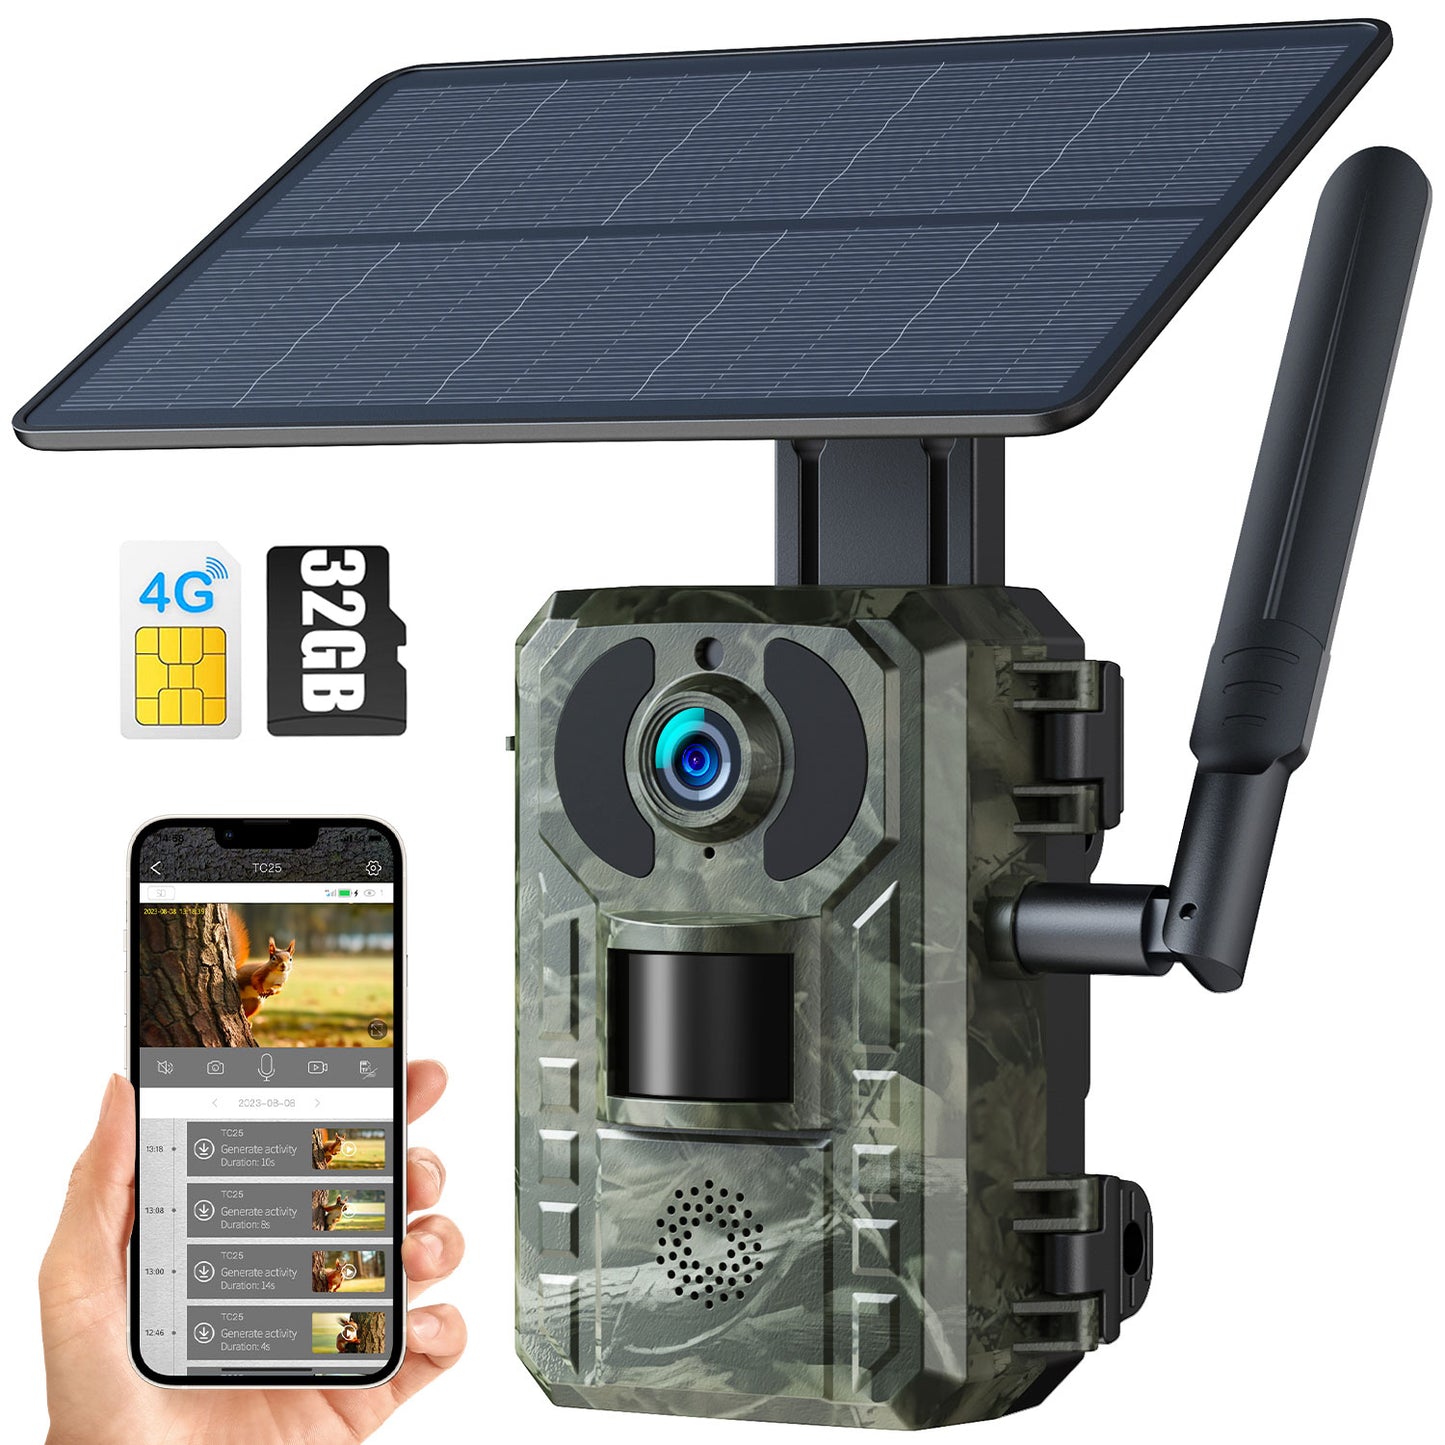 CAMPARK CAMPARK Trail Camera with 4G Cellular Solar SD Card, 2.5K 14MP Hunting Game Camera with Live View and Motion Alerts, 940nm No Glow Night Vision and IP66 Waterproof for Wildlife Monitoring